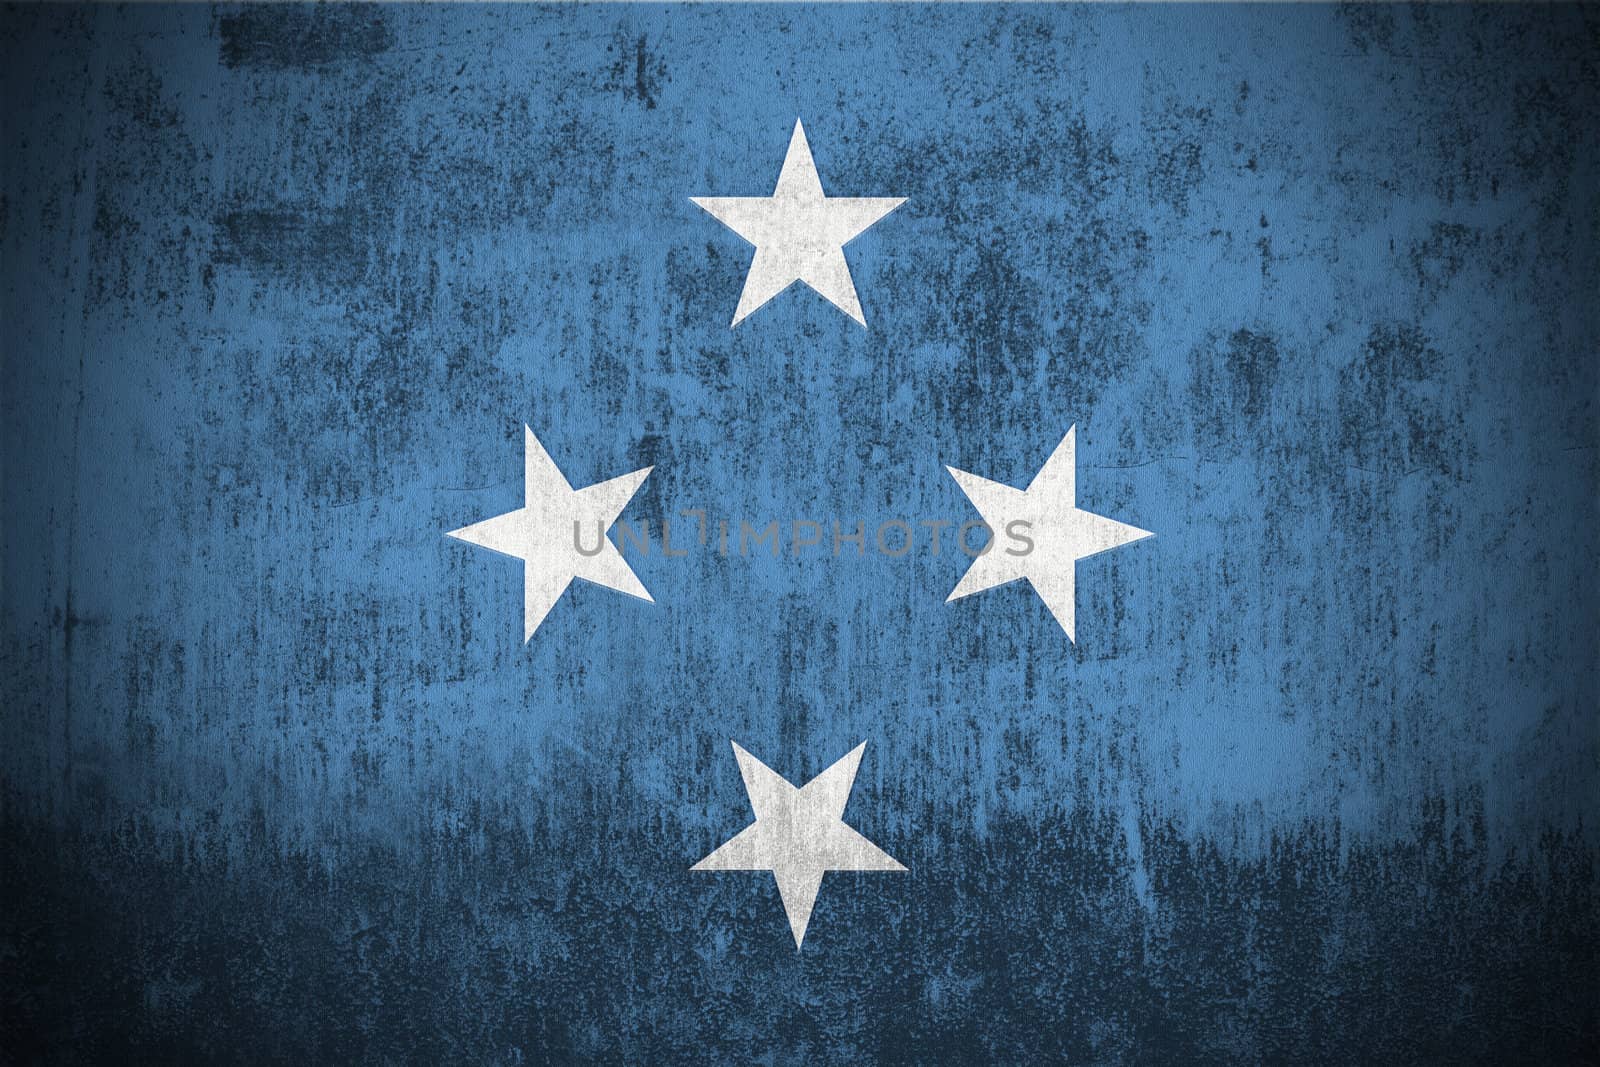 Weathered Flag Of Micronesia, fabric textured
